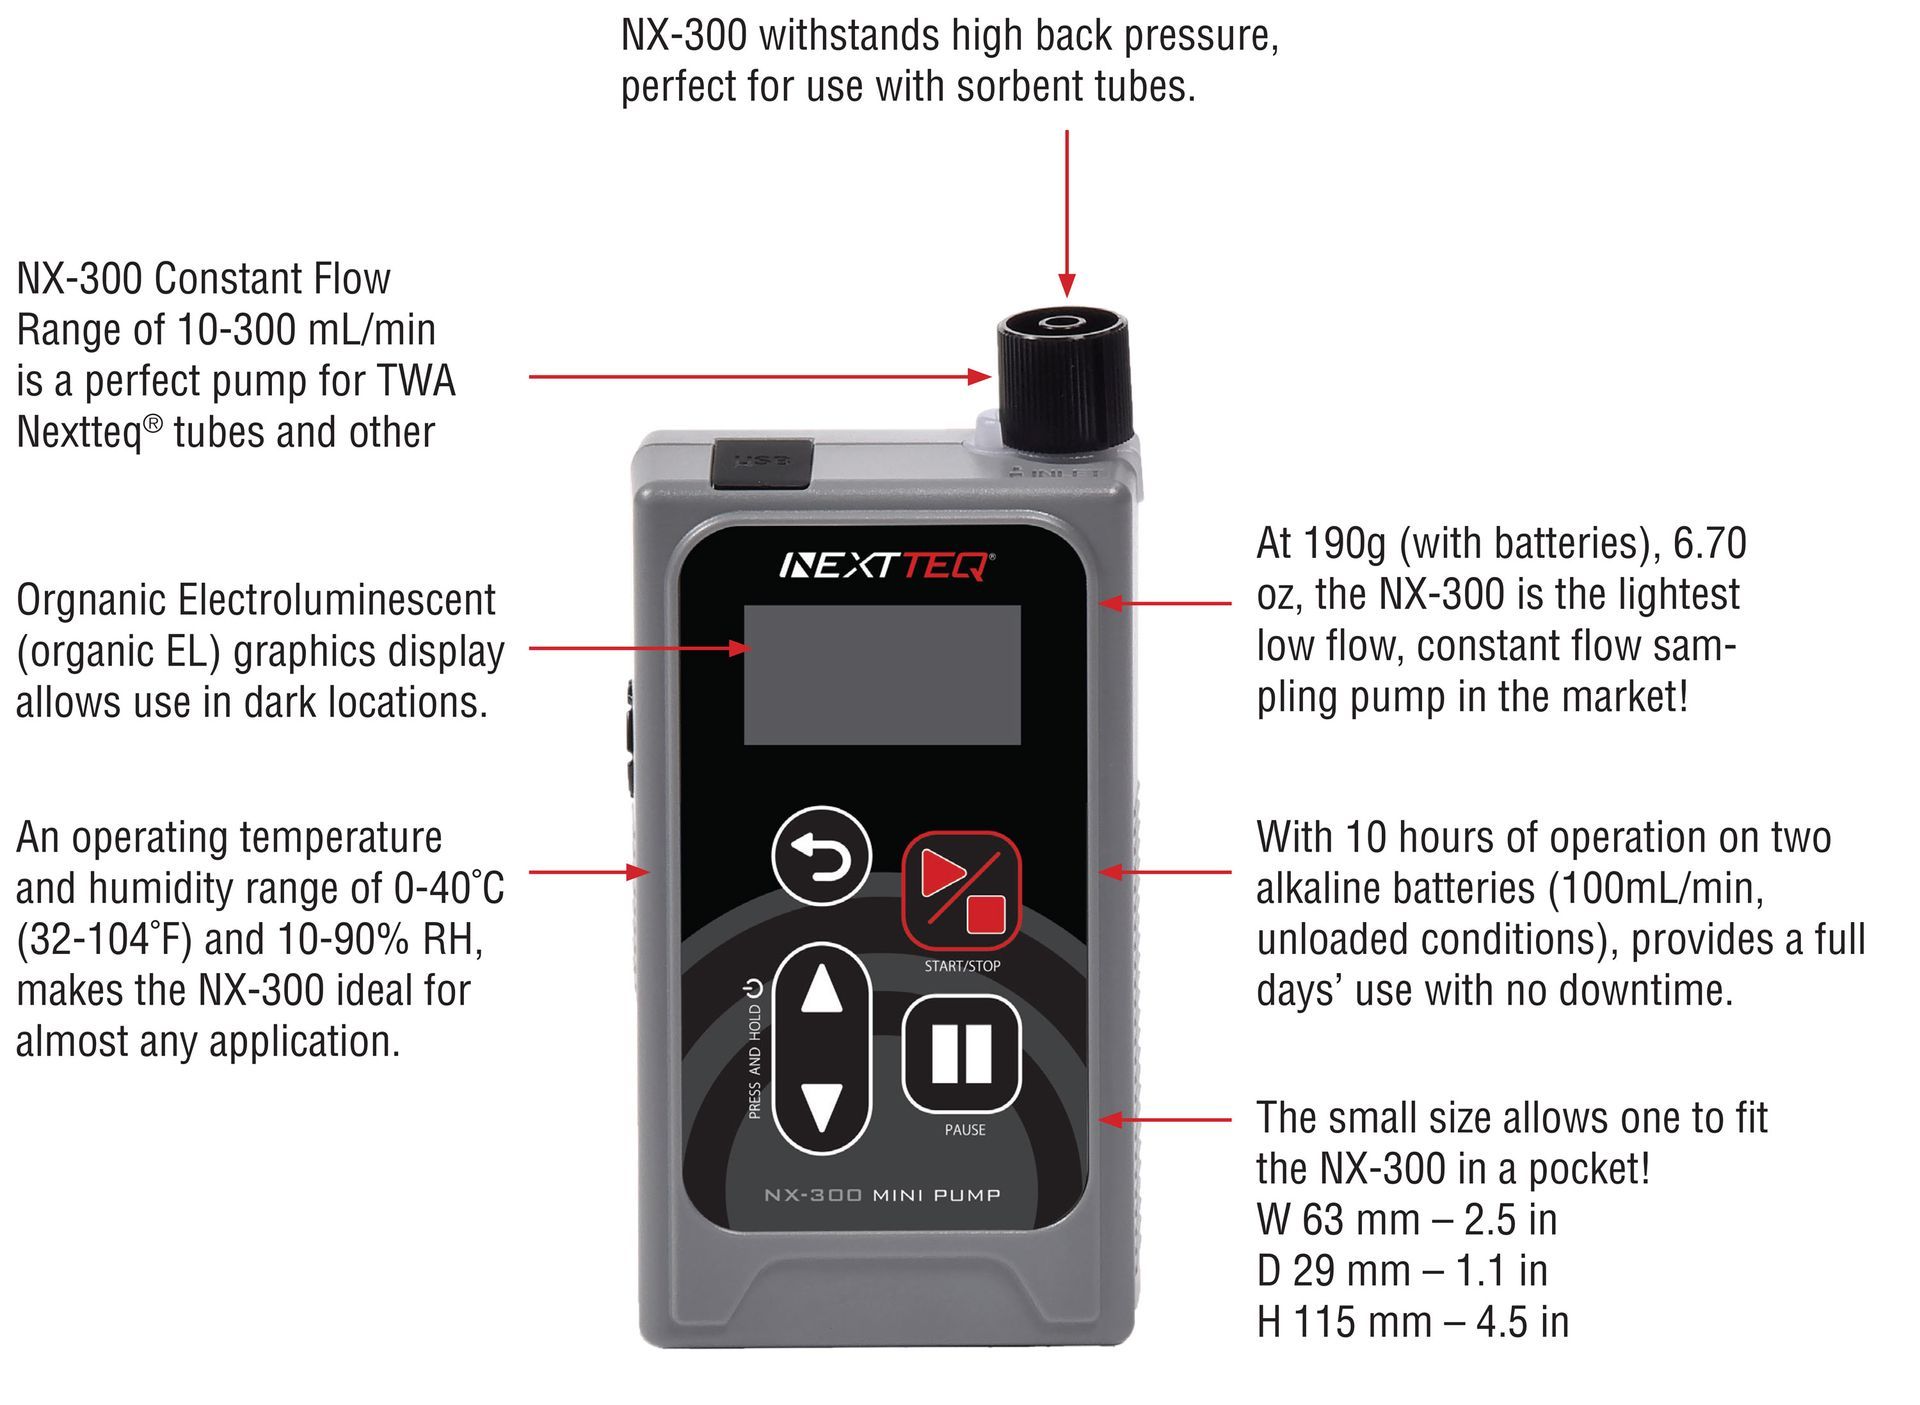 The Nextteq® NX-300 Constant Flow - Low Flow Air Sampling Pump with feature call-outs.